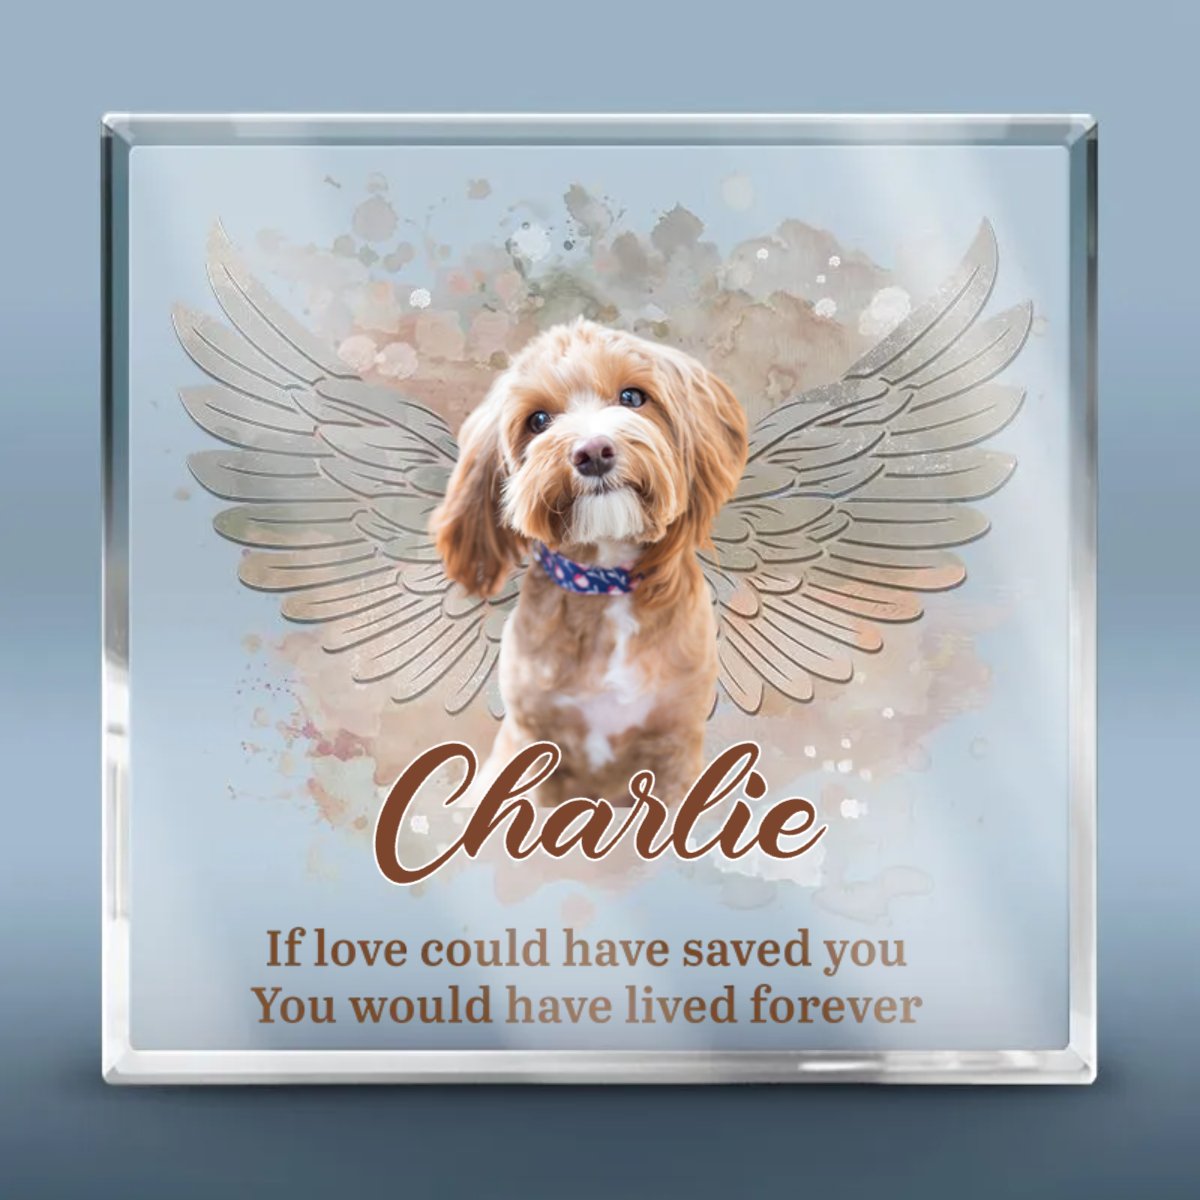 Pet Lovers - You Left Paw Prints On Our Hearts - Personalized Acrylic Plaque - The Next Custom Gift